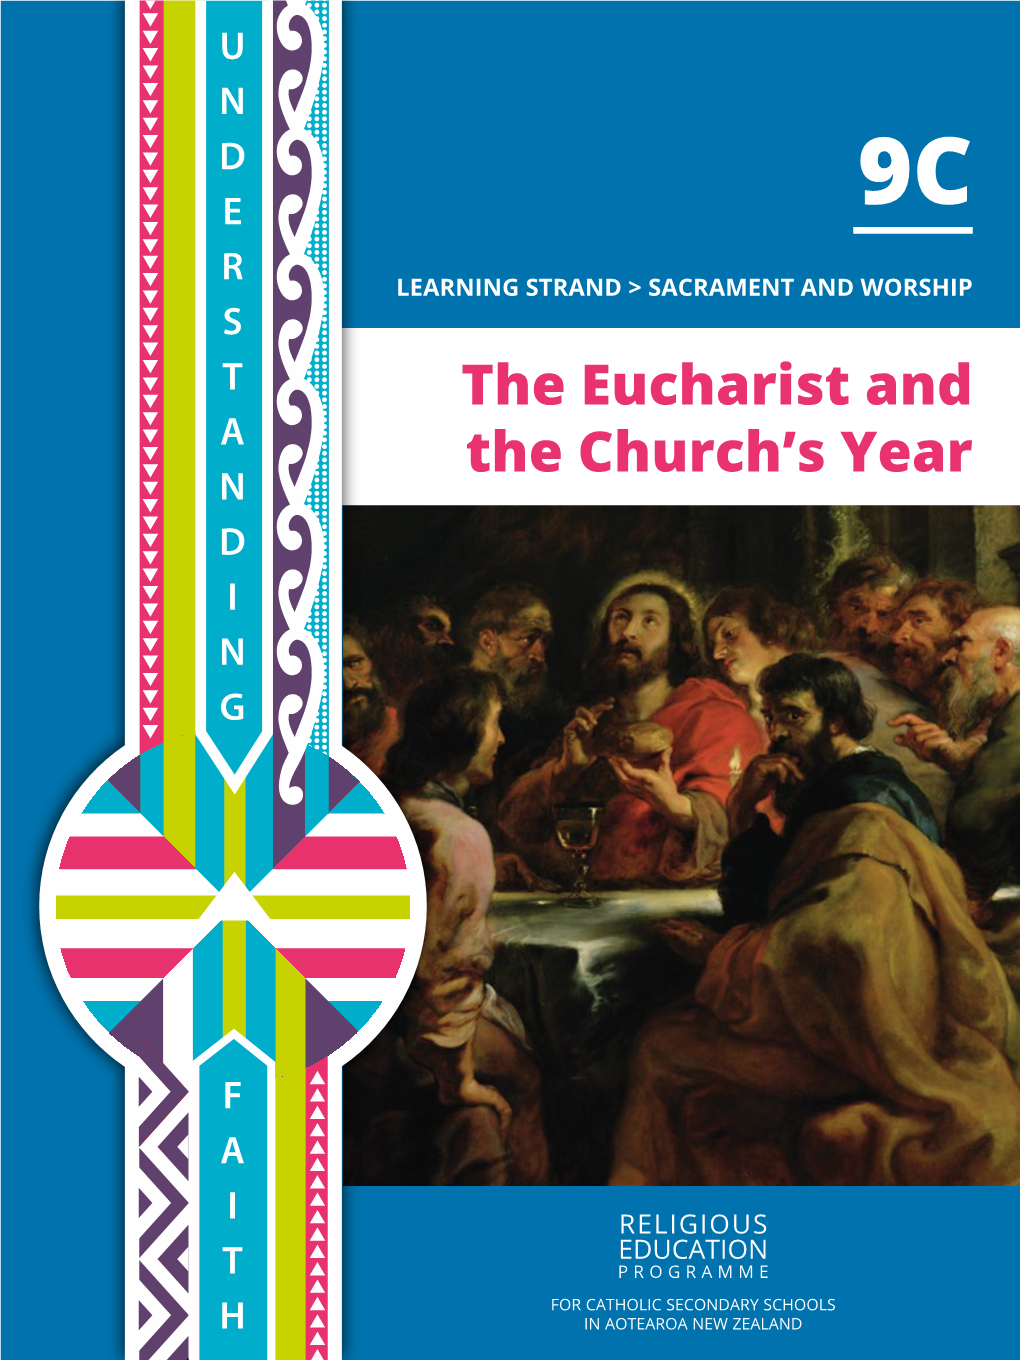 The Eucharist and the Church's Year